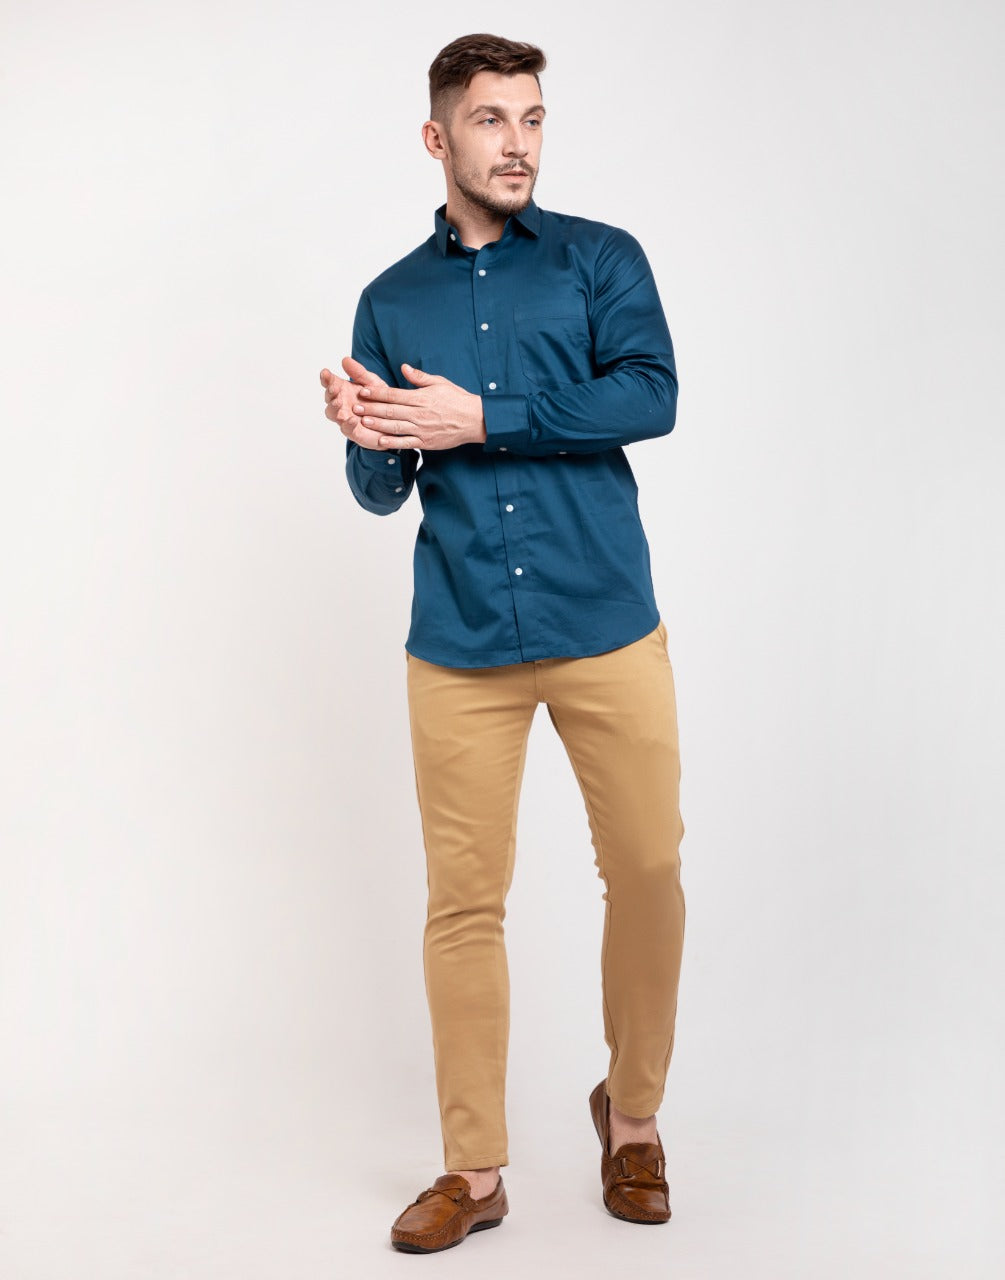 Turquoise blue formal & office wear shirt